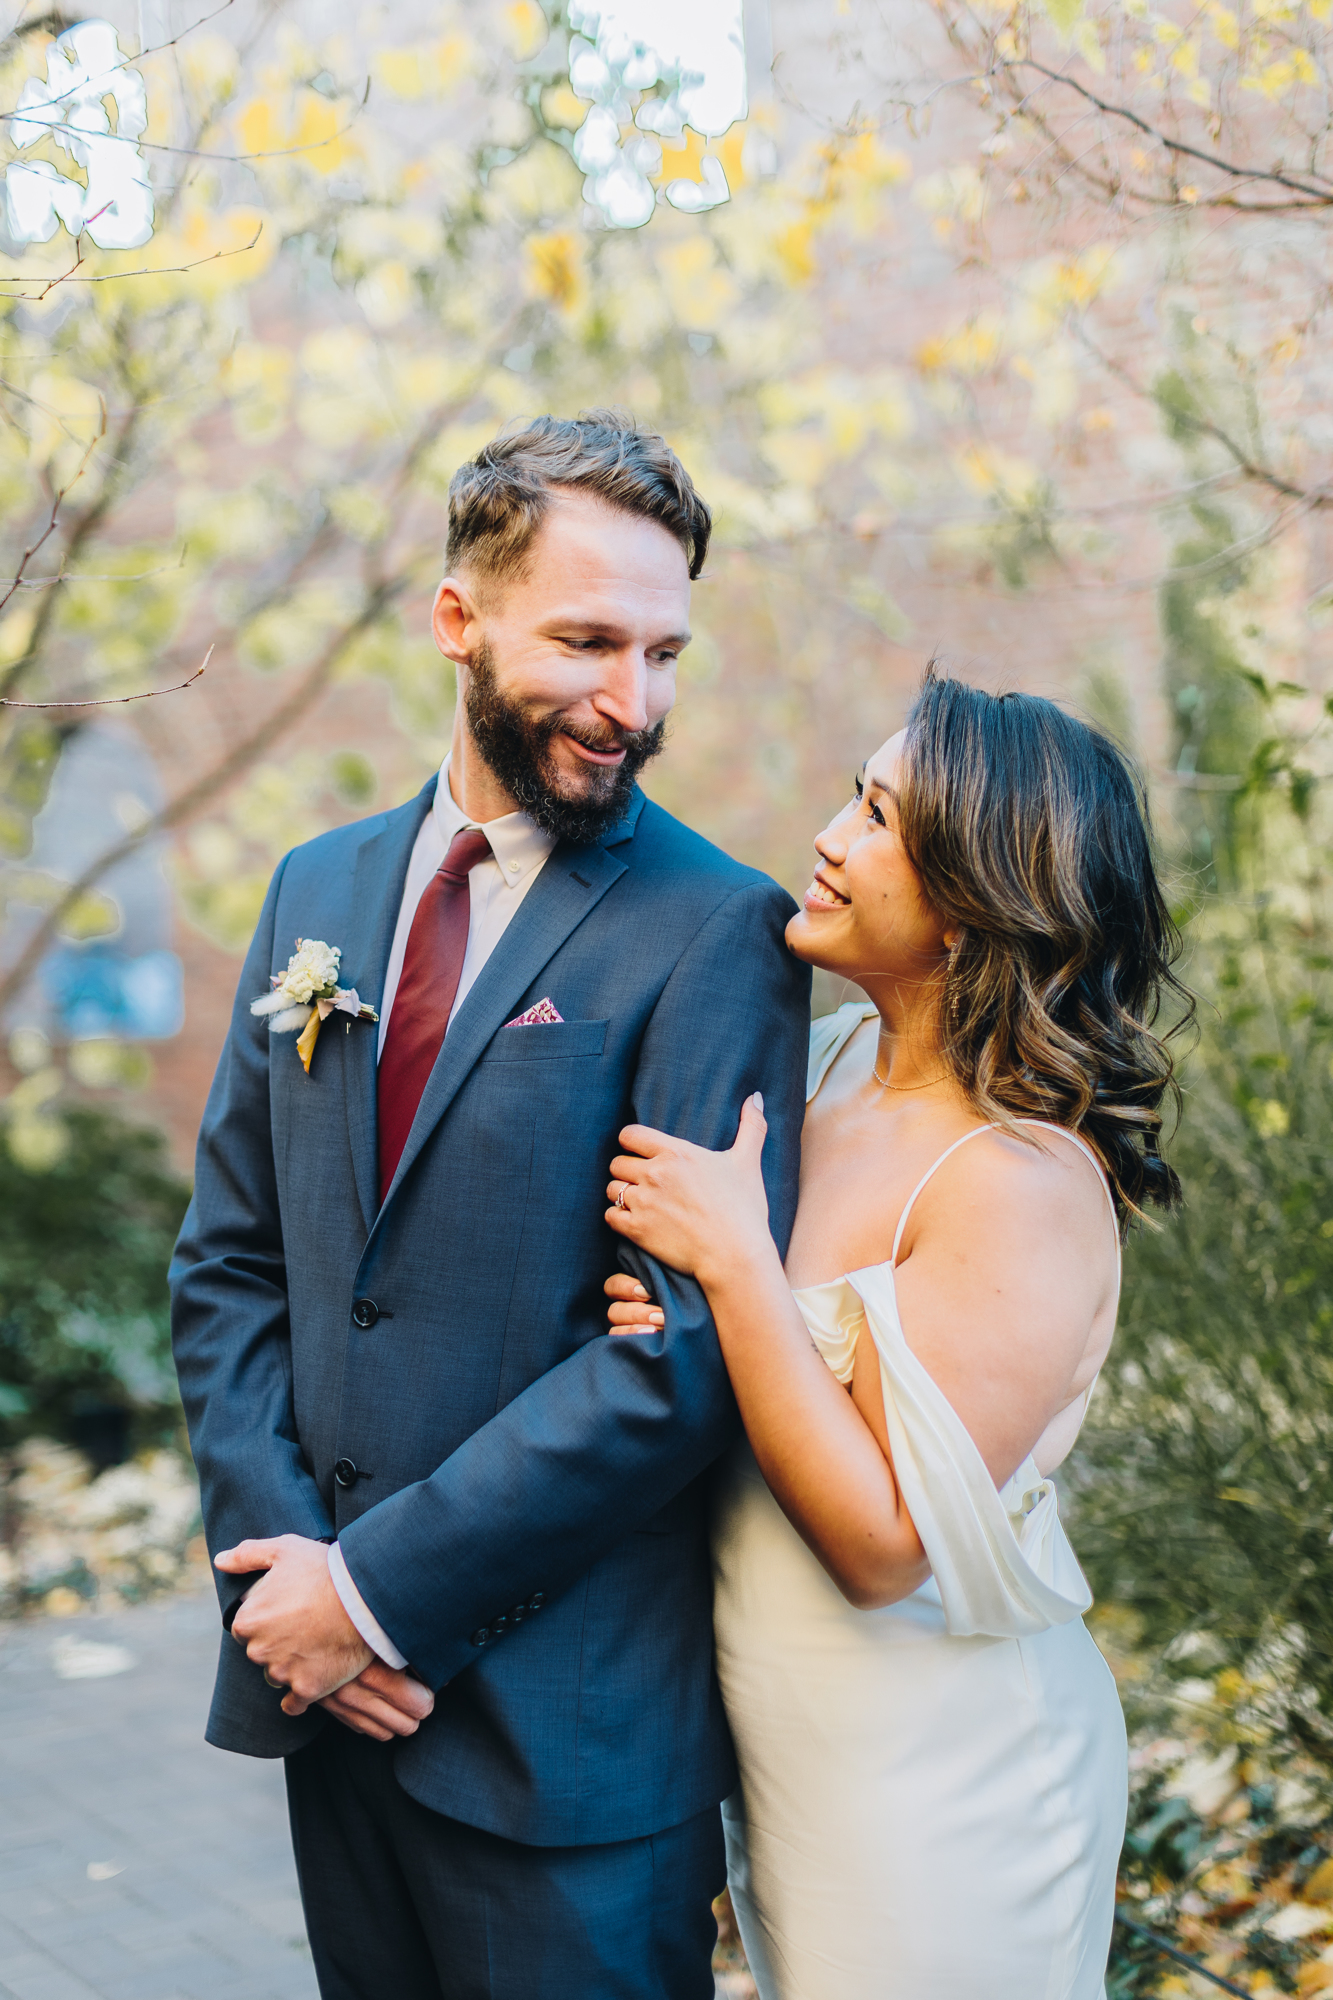 Beautiful Fall DUMBO Elopement with NYC views and foliage